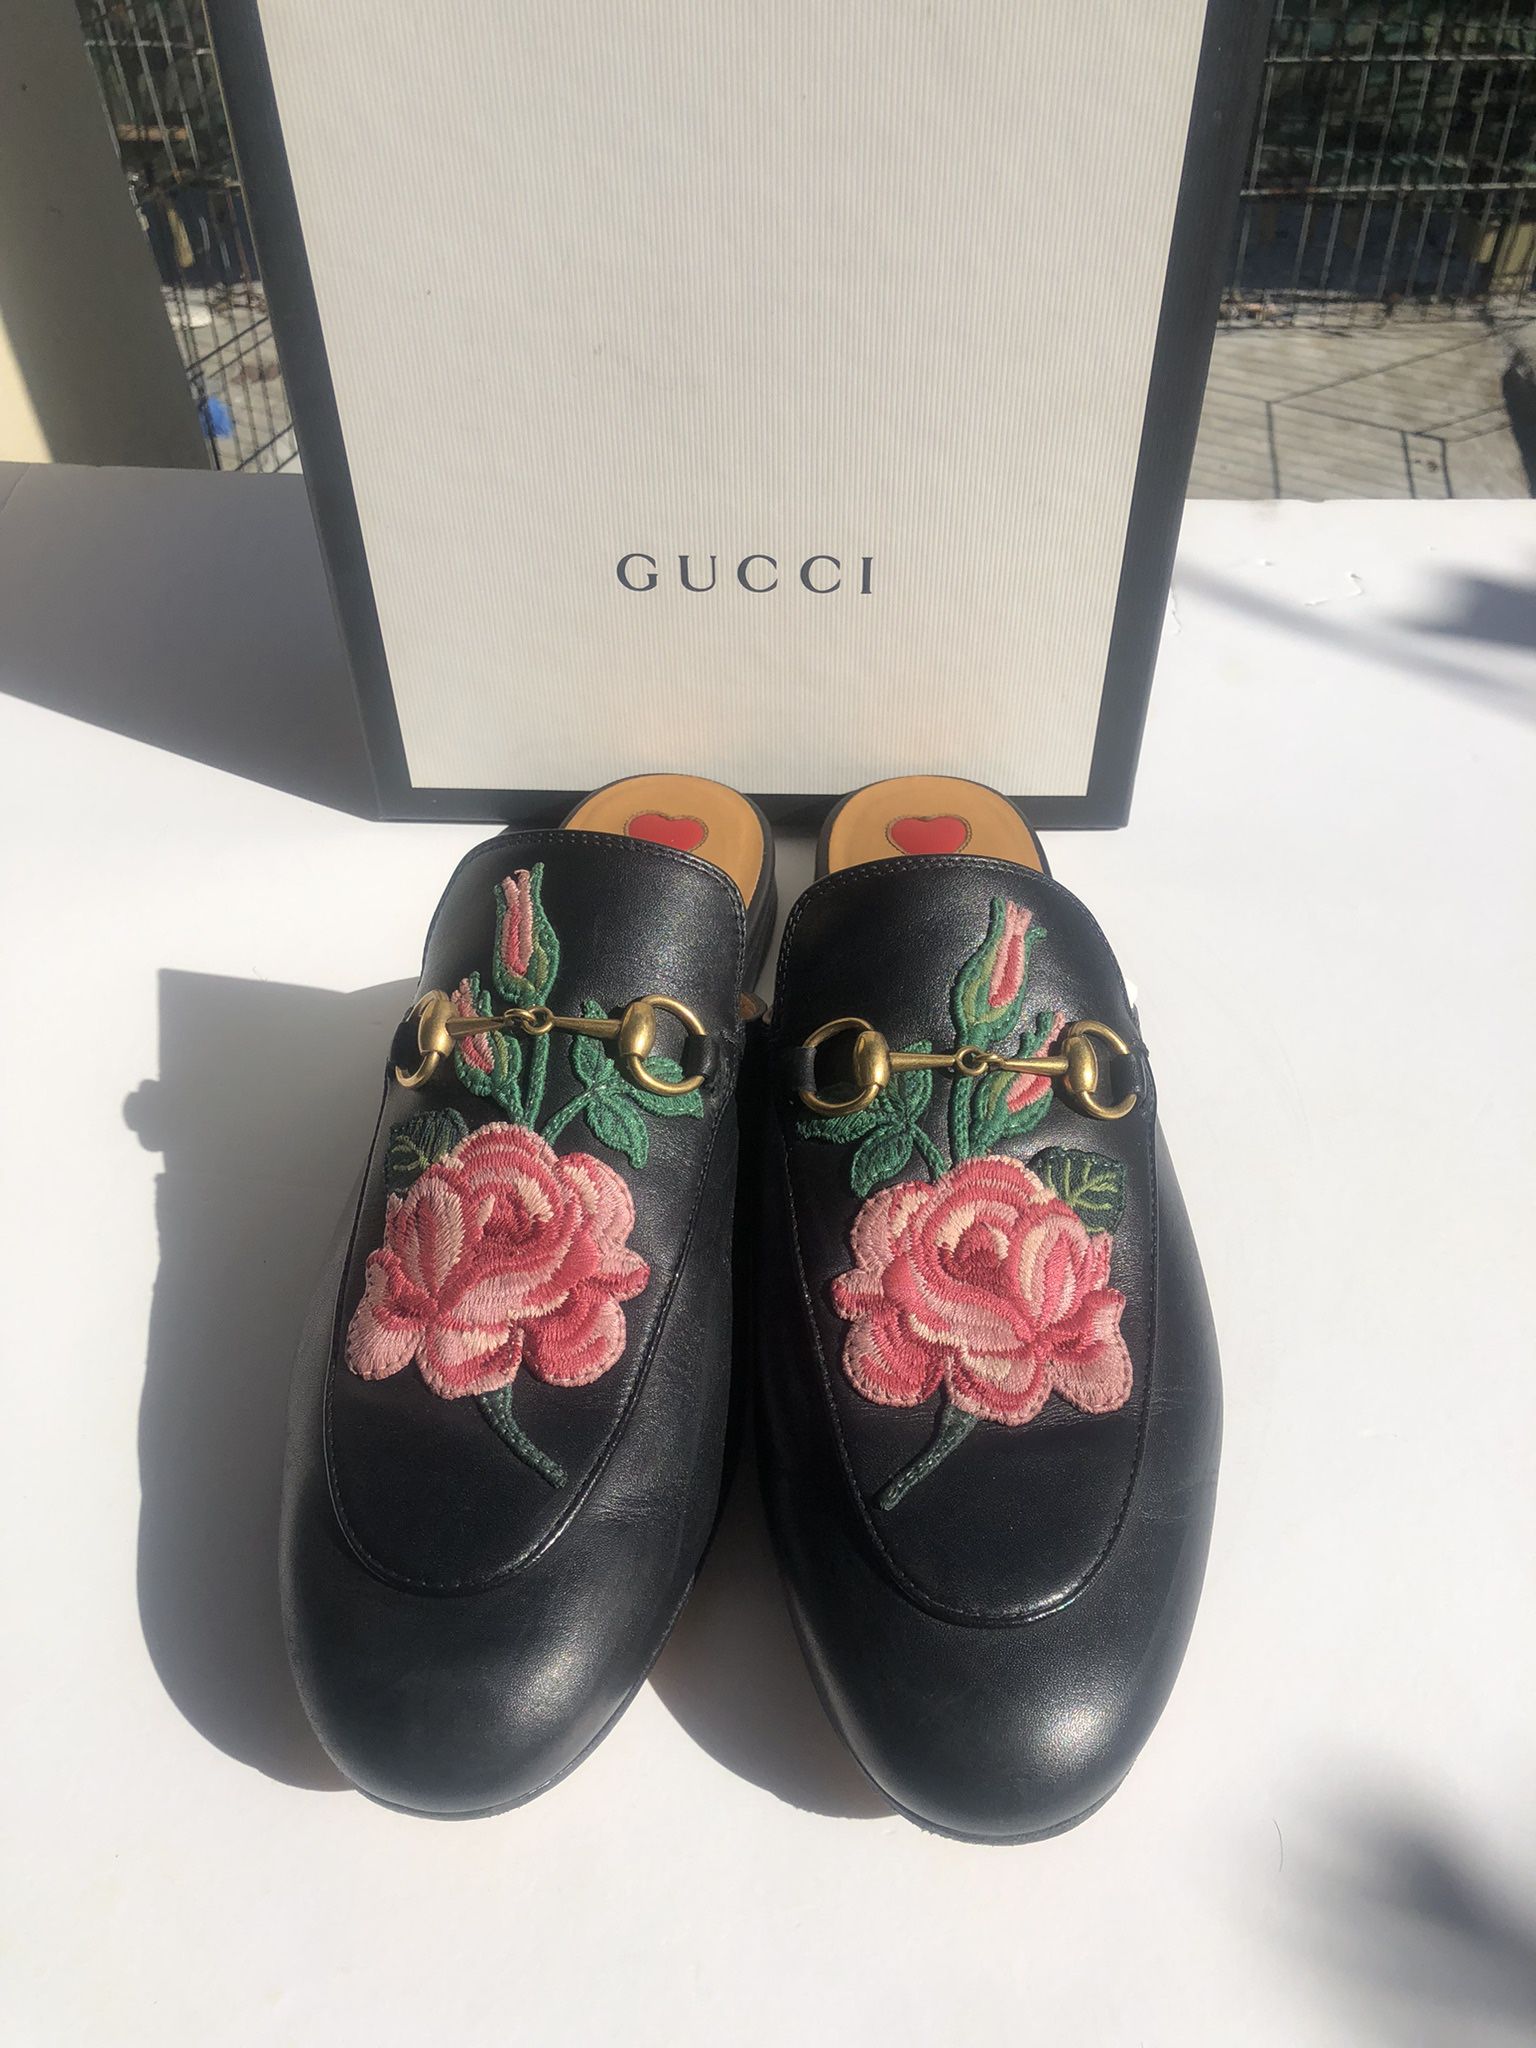 Gucci shoes for woman used